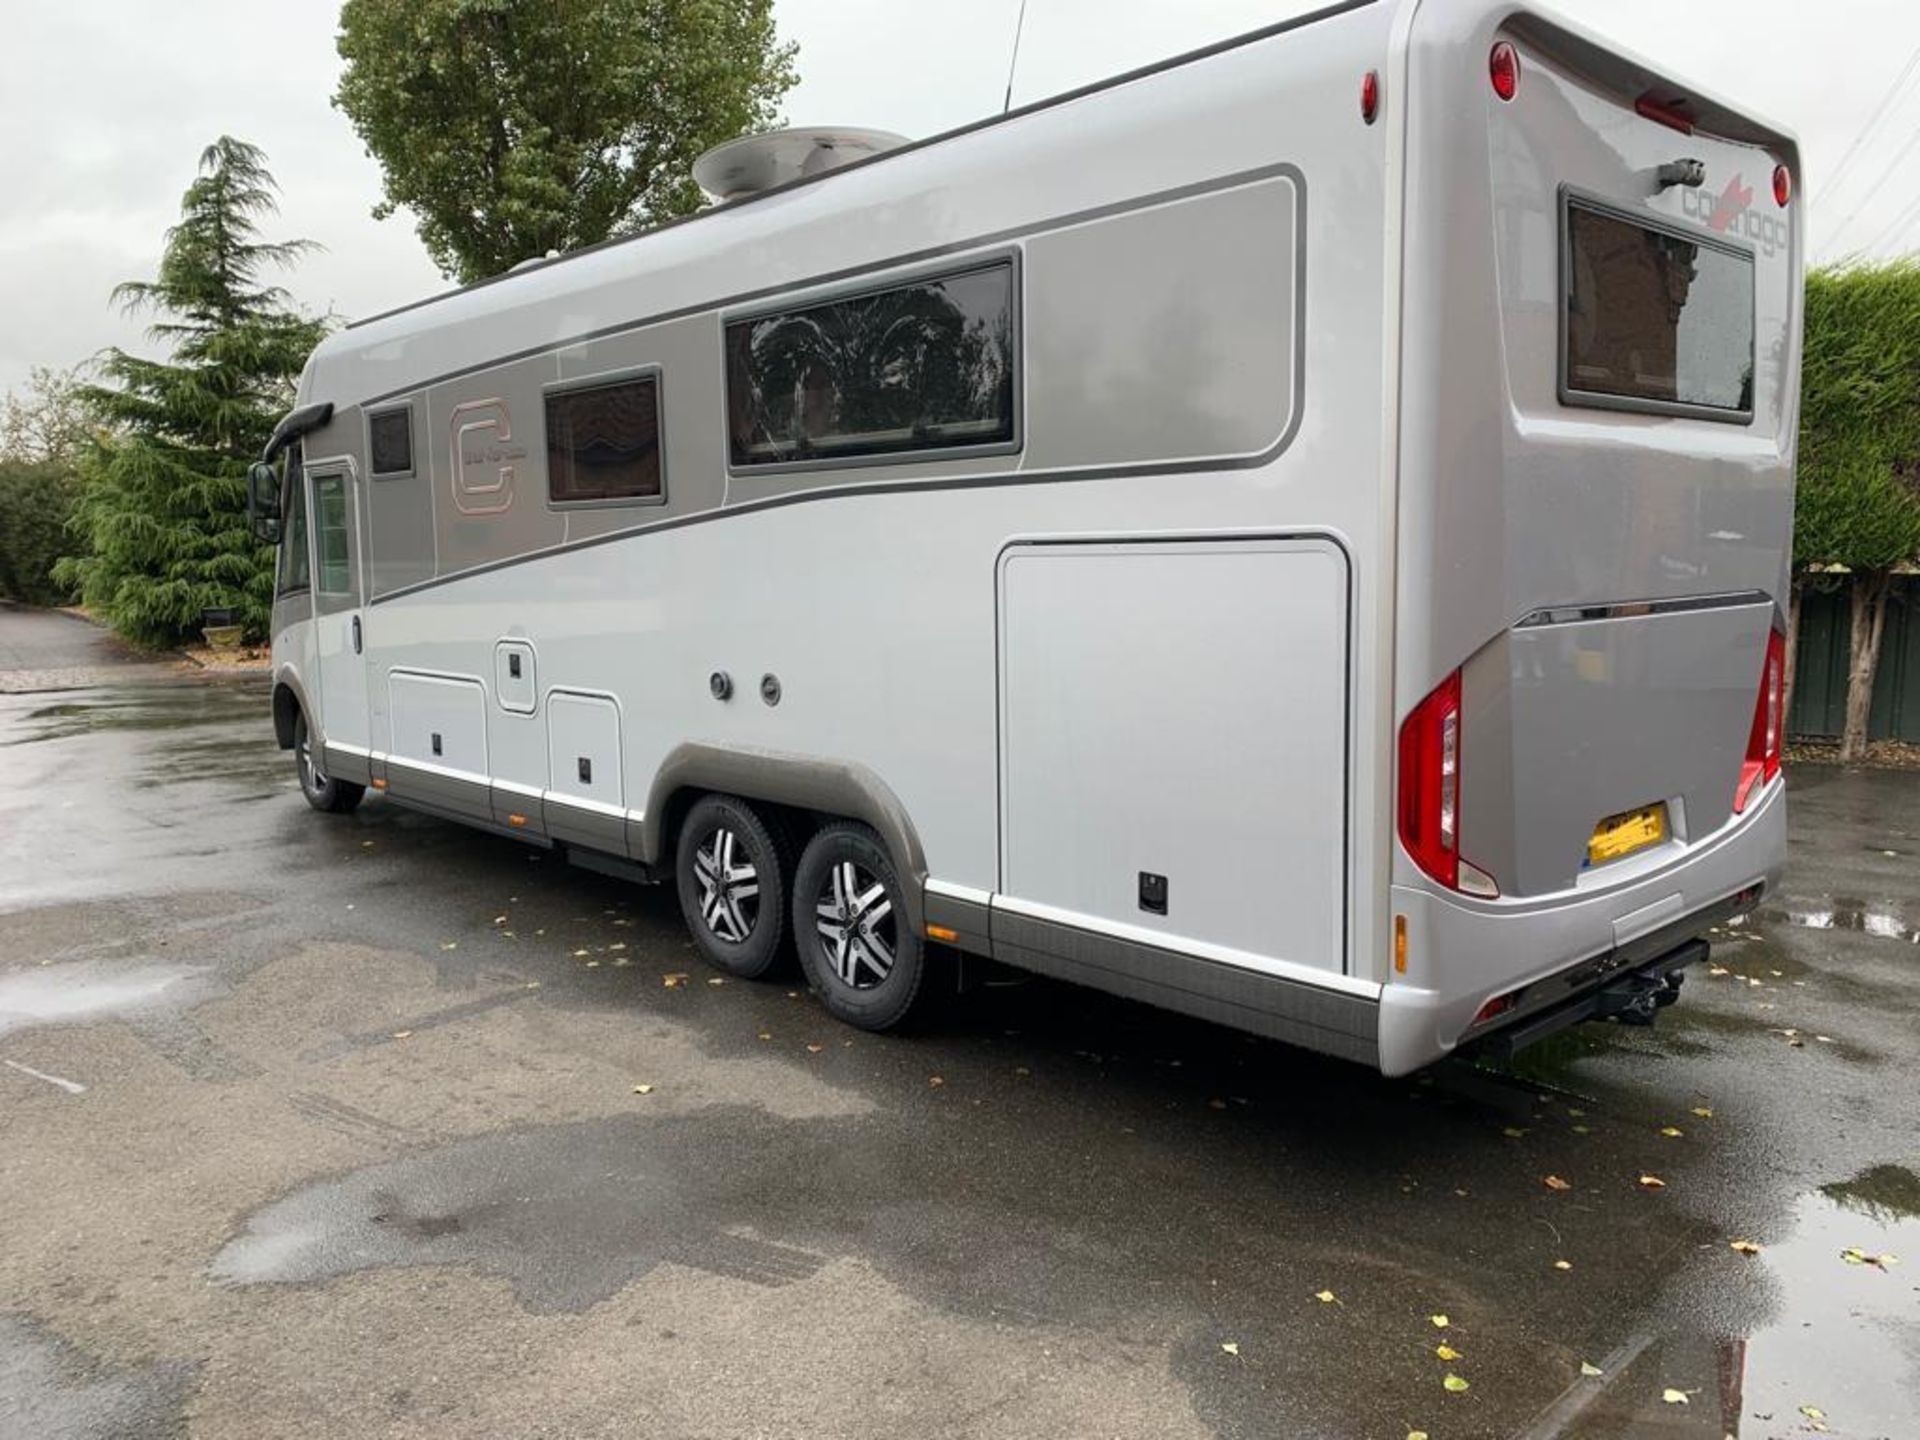 2020 CARTHAGO LINER-FOR-TWO 53L MOTORHOME 11 mths WARRANTY 4529 MILES, MINT CONDITION NO VAT - Image 3 of 38